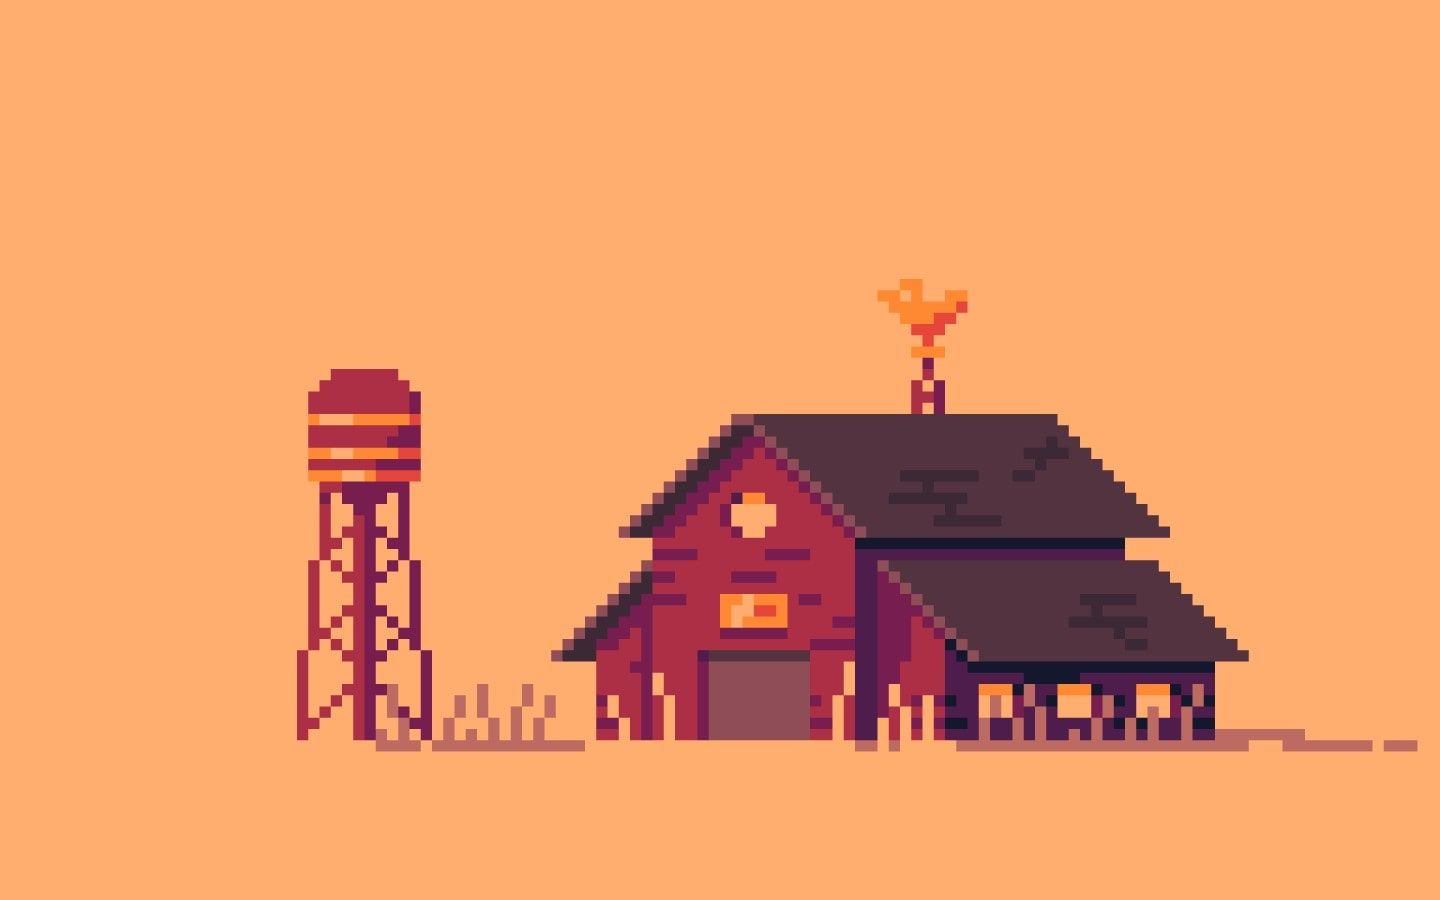 A pixel art of an old barn and silo - Pixel art